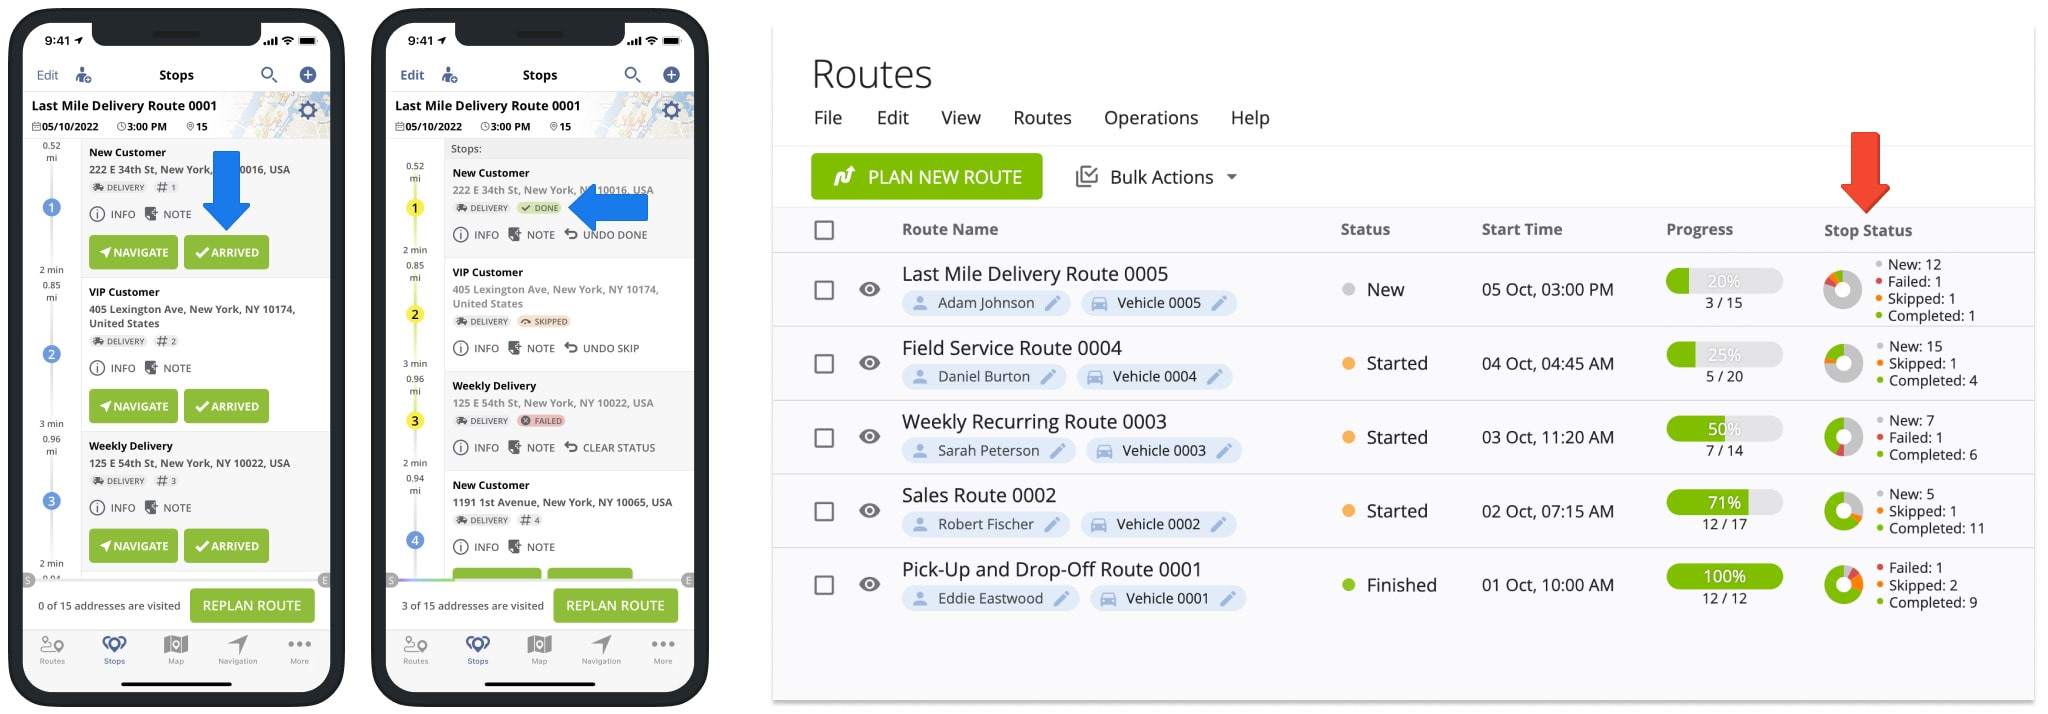 Route Planner Routes List stops statuses for not visited, visited, failed, skipped, and completed route stops.